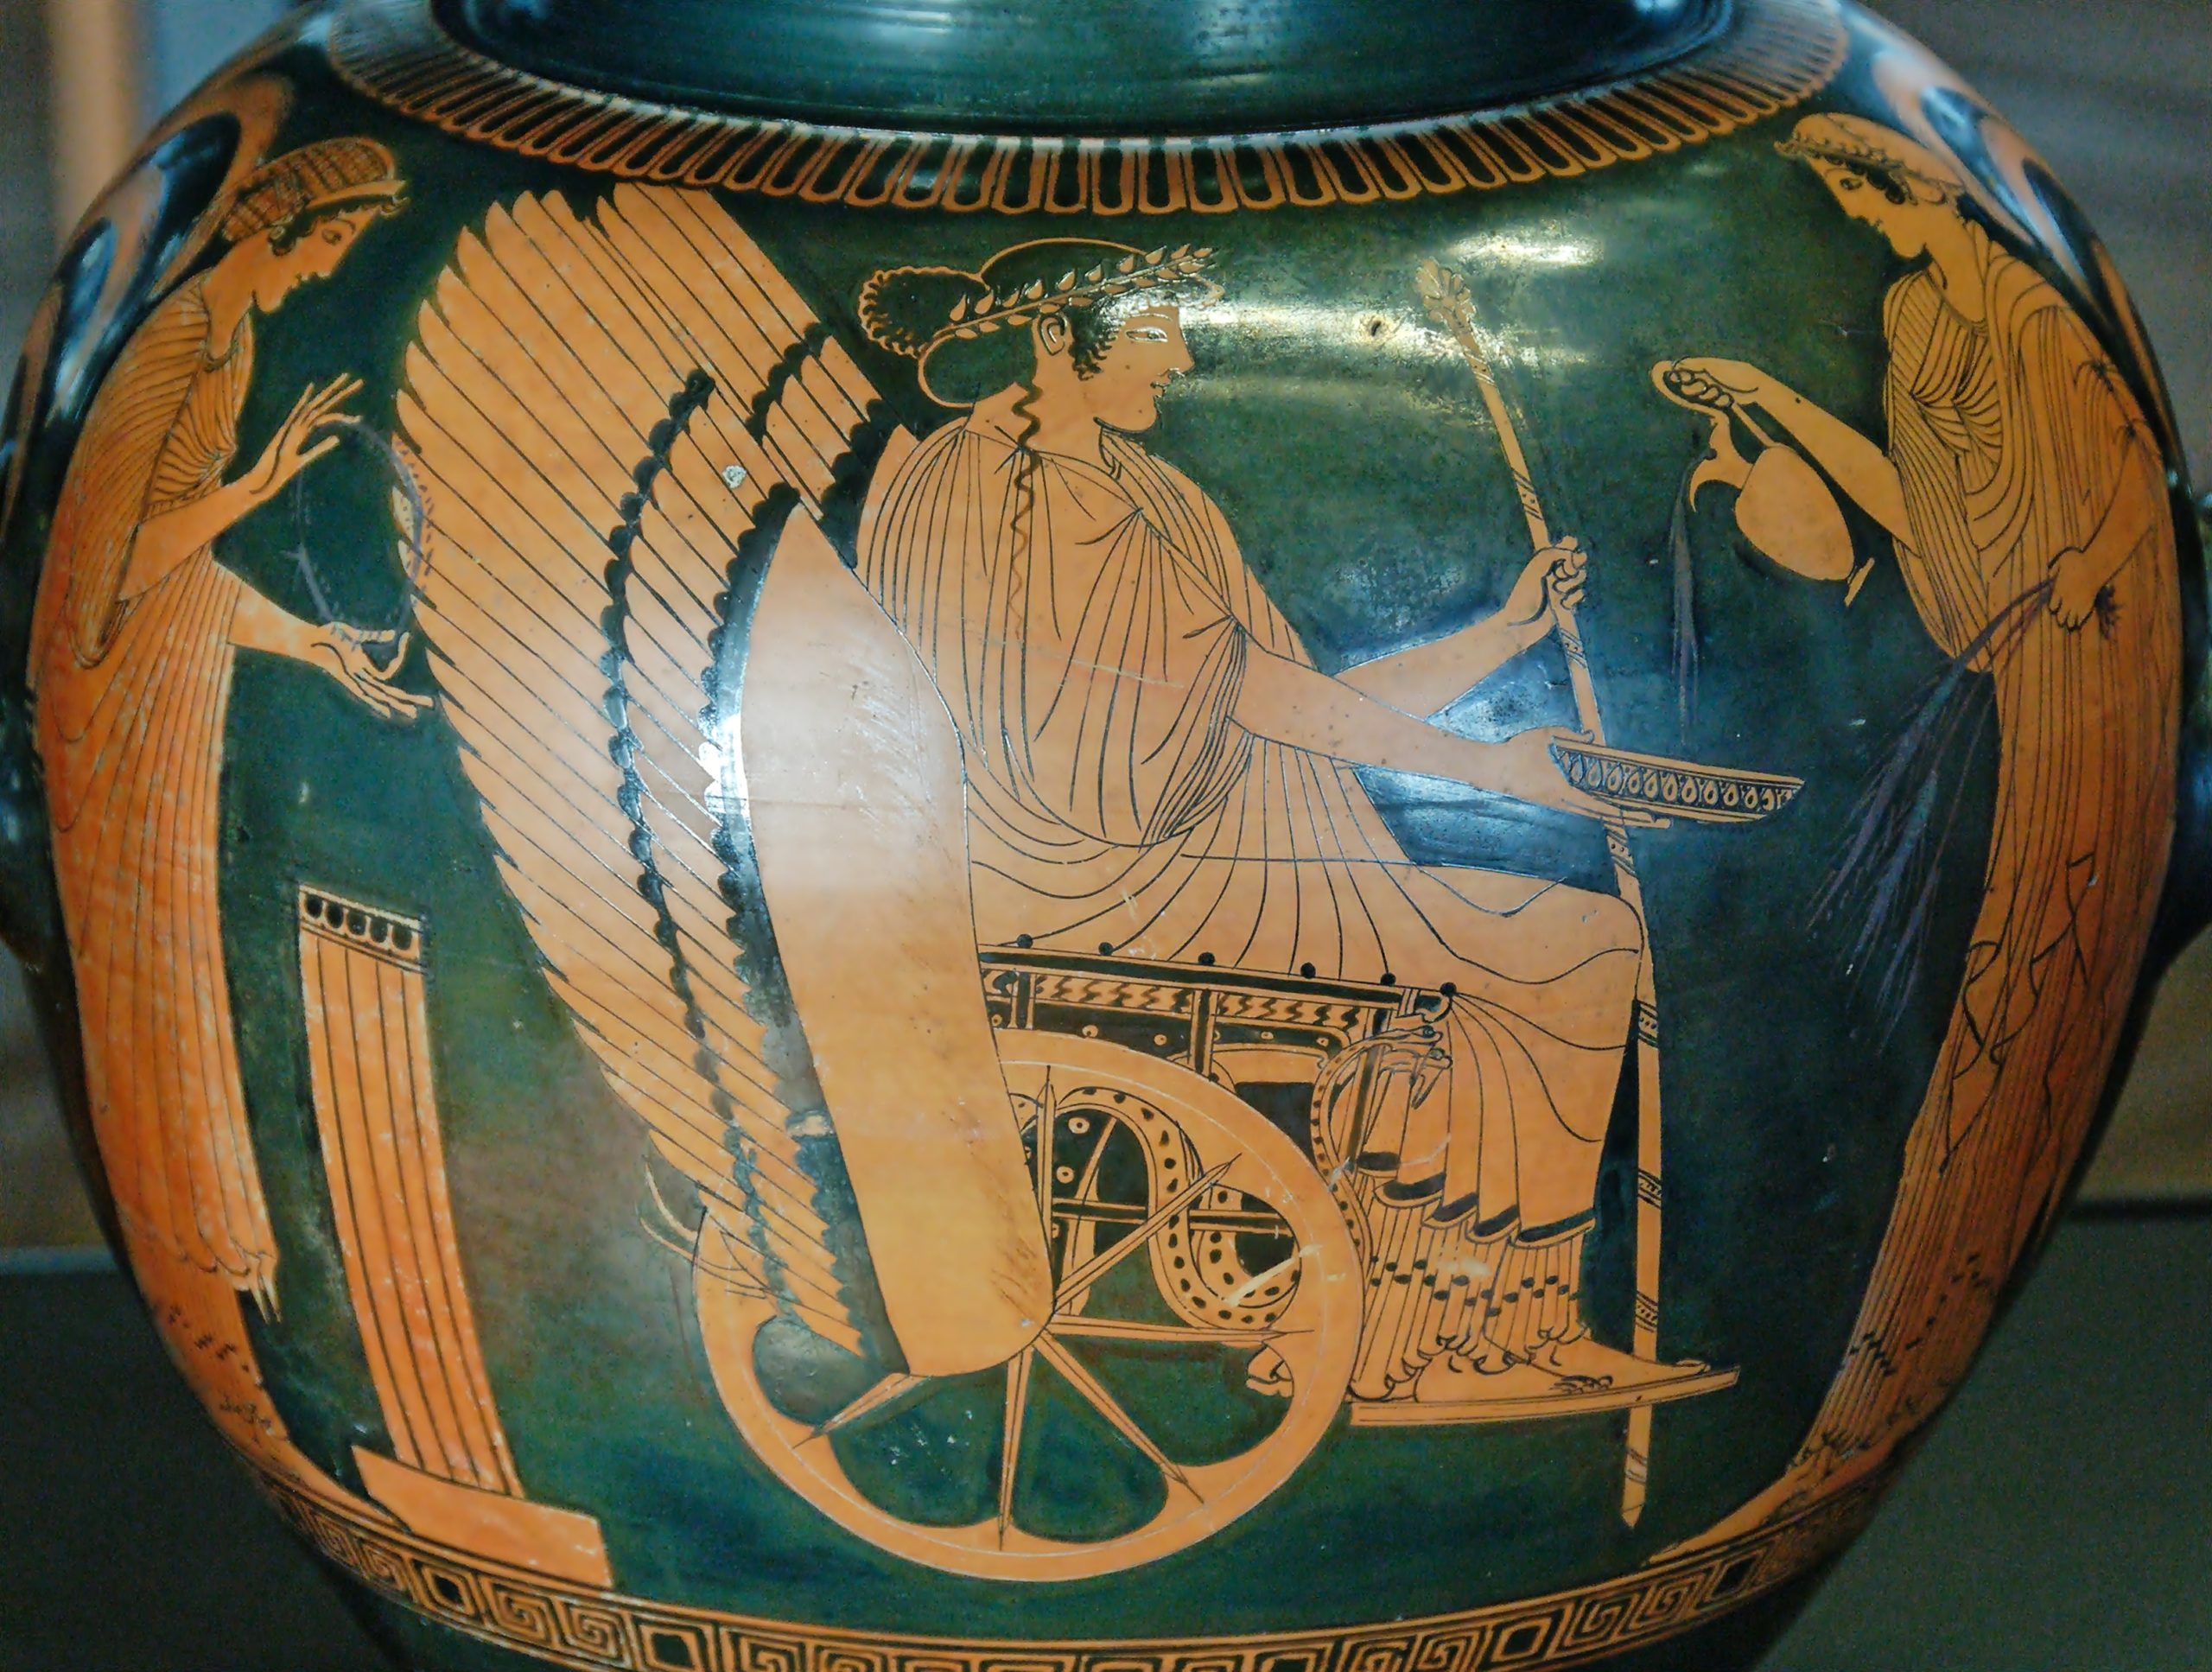 Triptolemos seated in a winged chariot and holding a scepter. Behind him stands Persephone, and in front of him stands Demeter with sheaves of wheat.